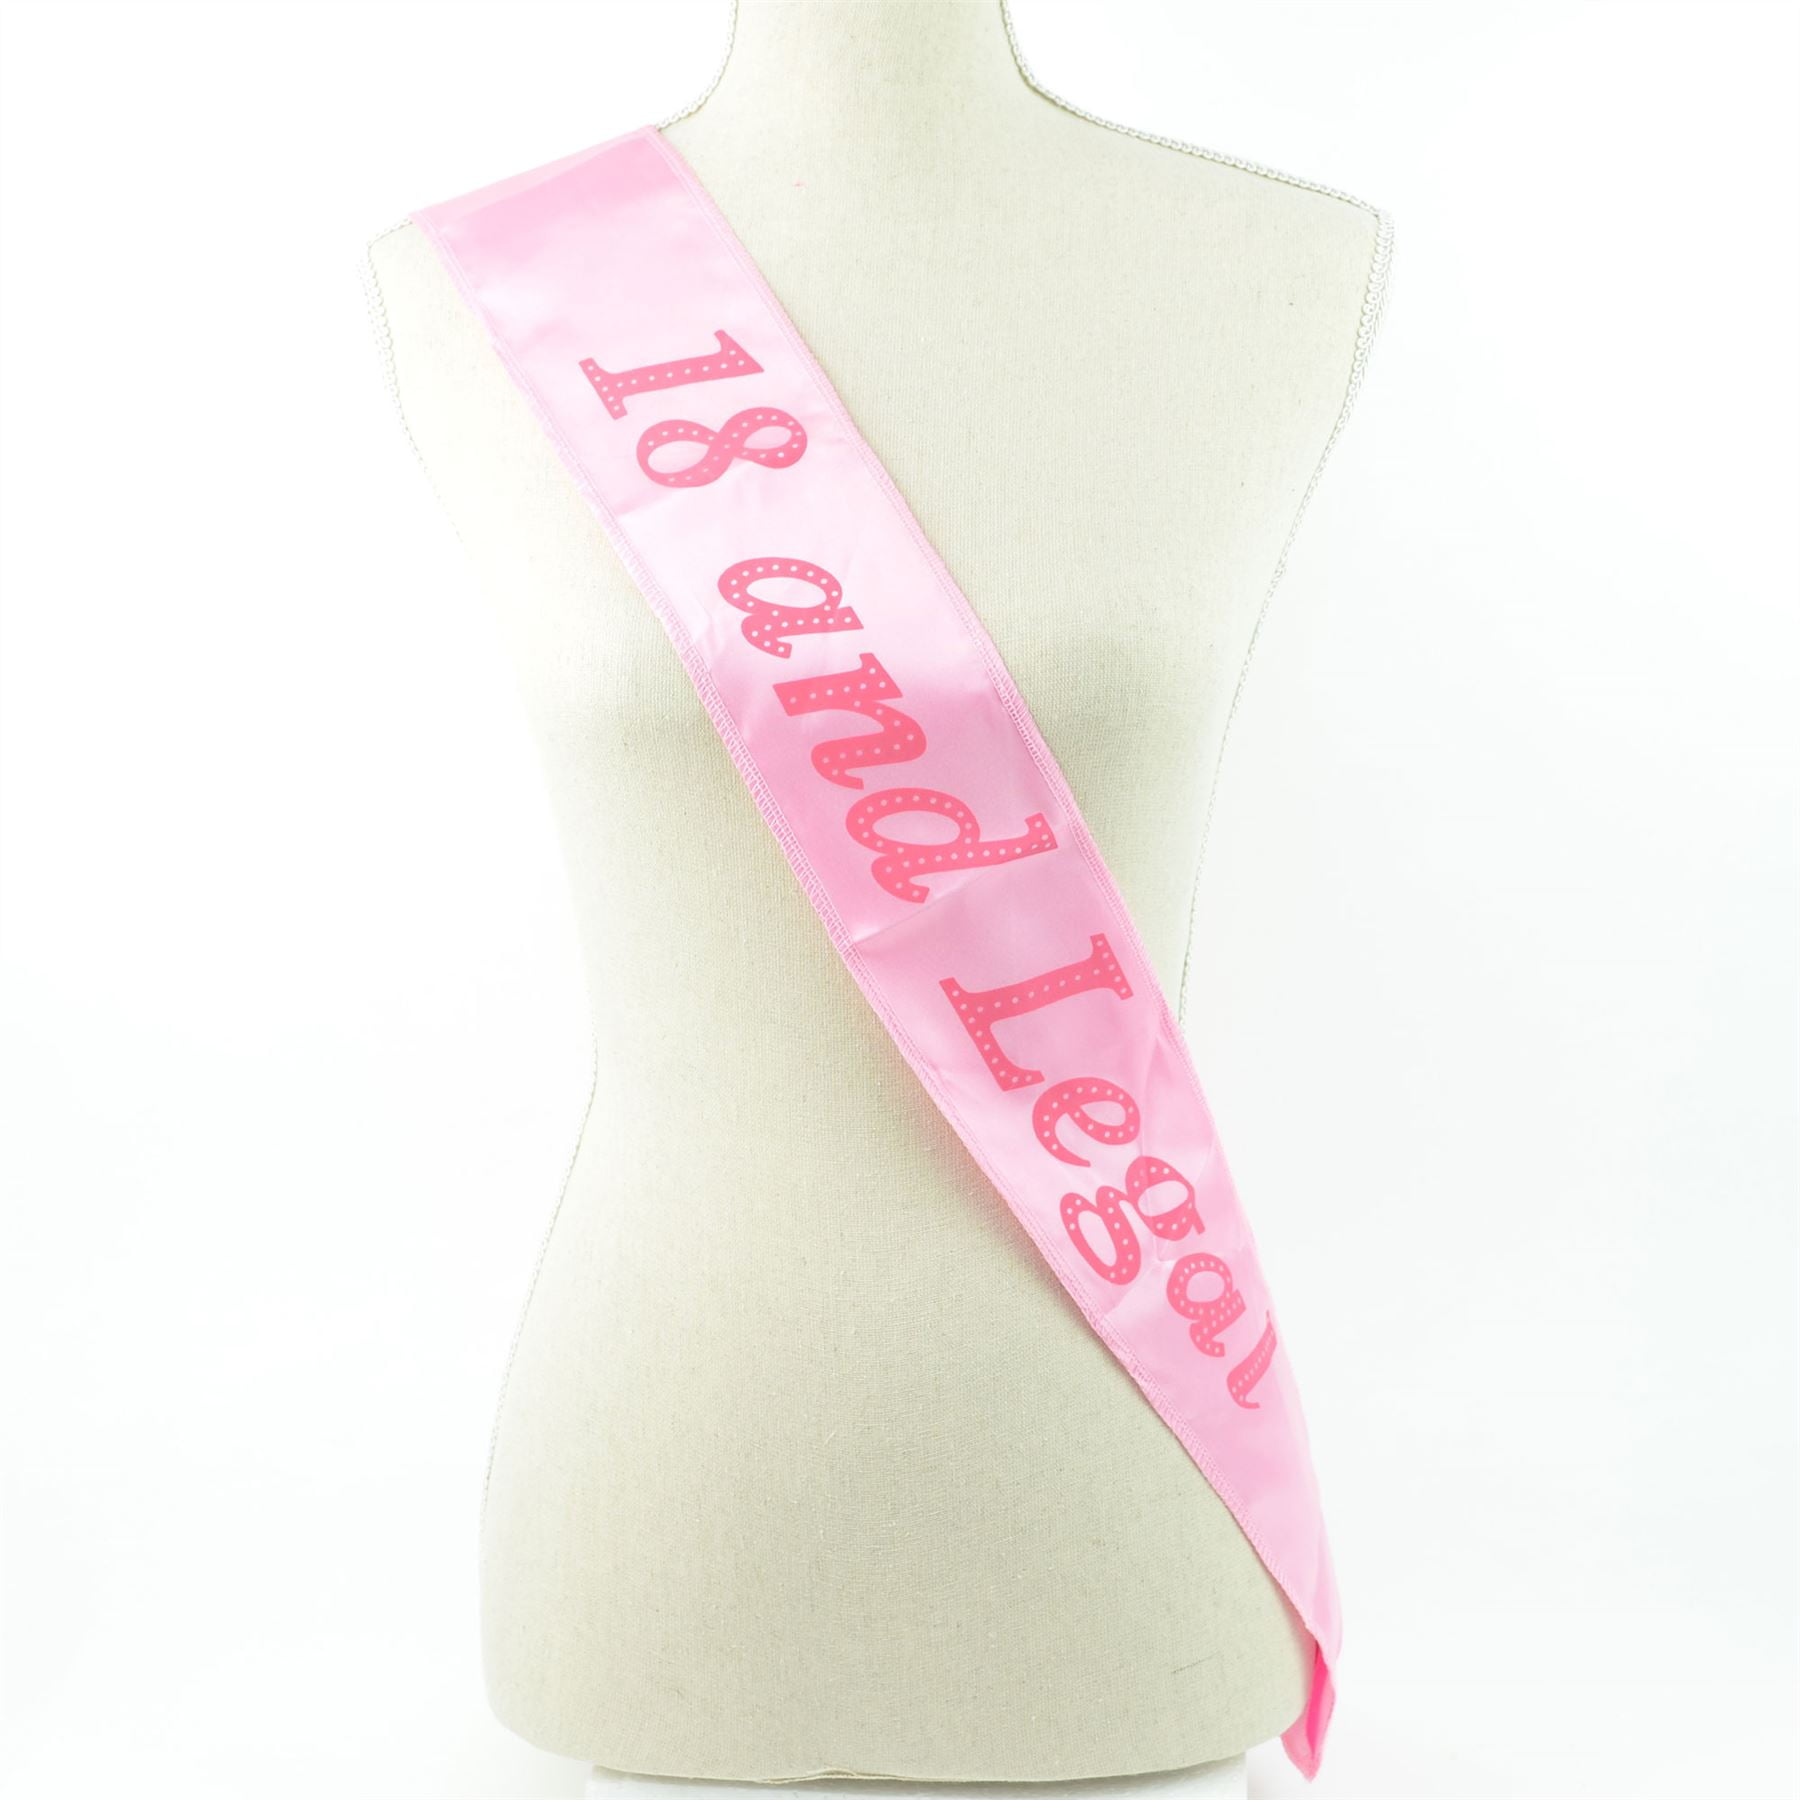 18th Birthday Sash 18 And Legal Pink & Black Satin Gifts Decorations Banner 